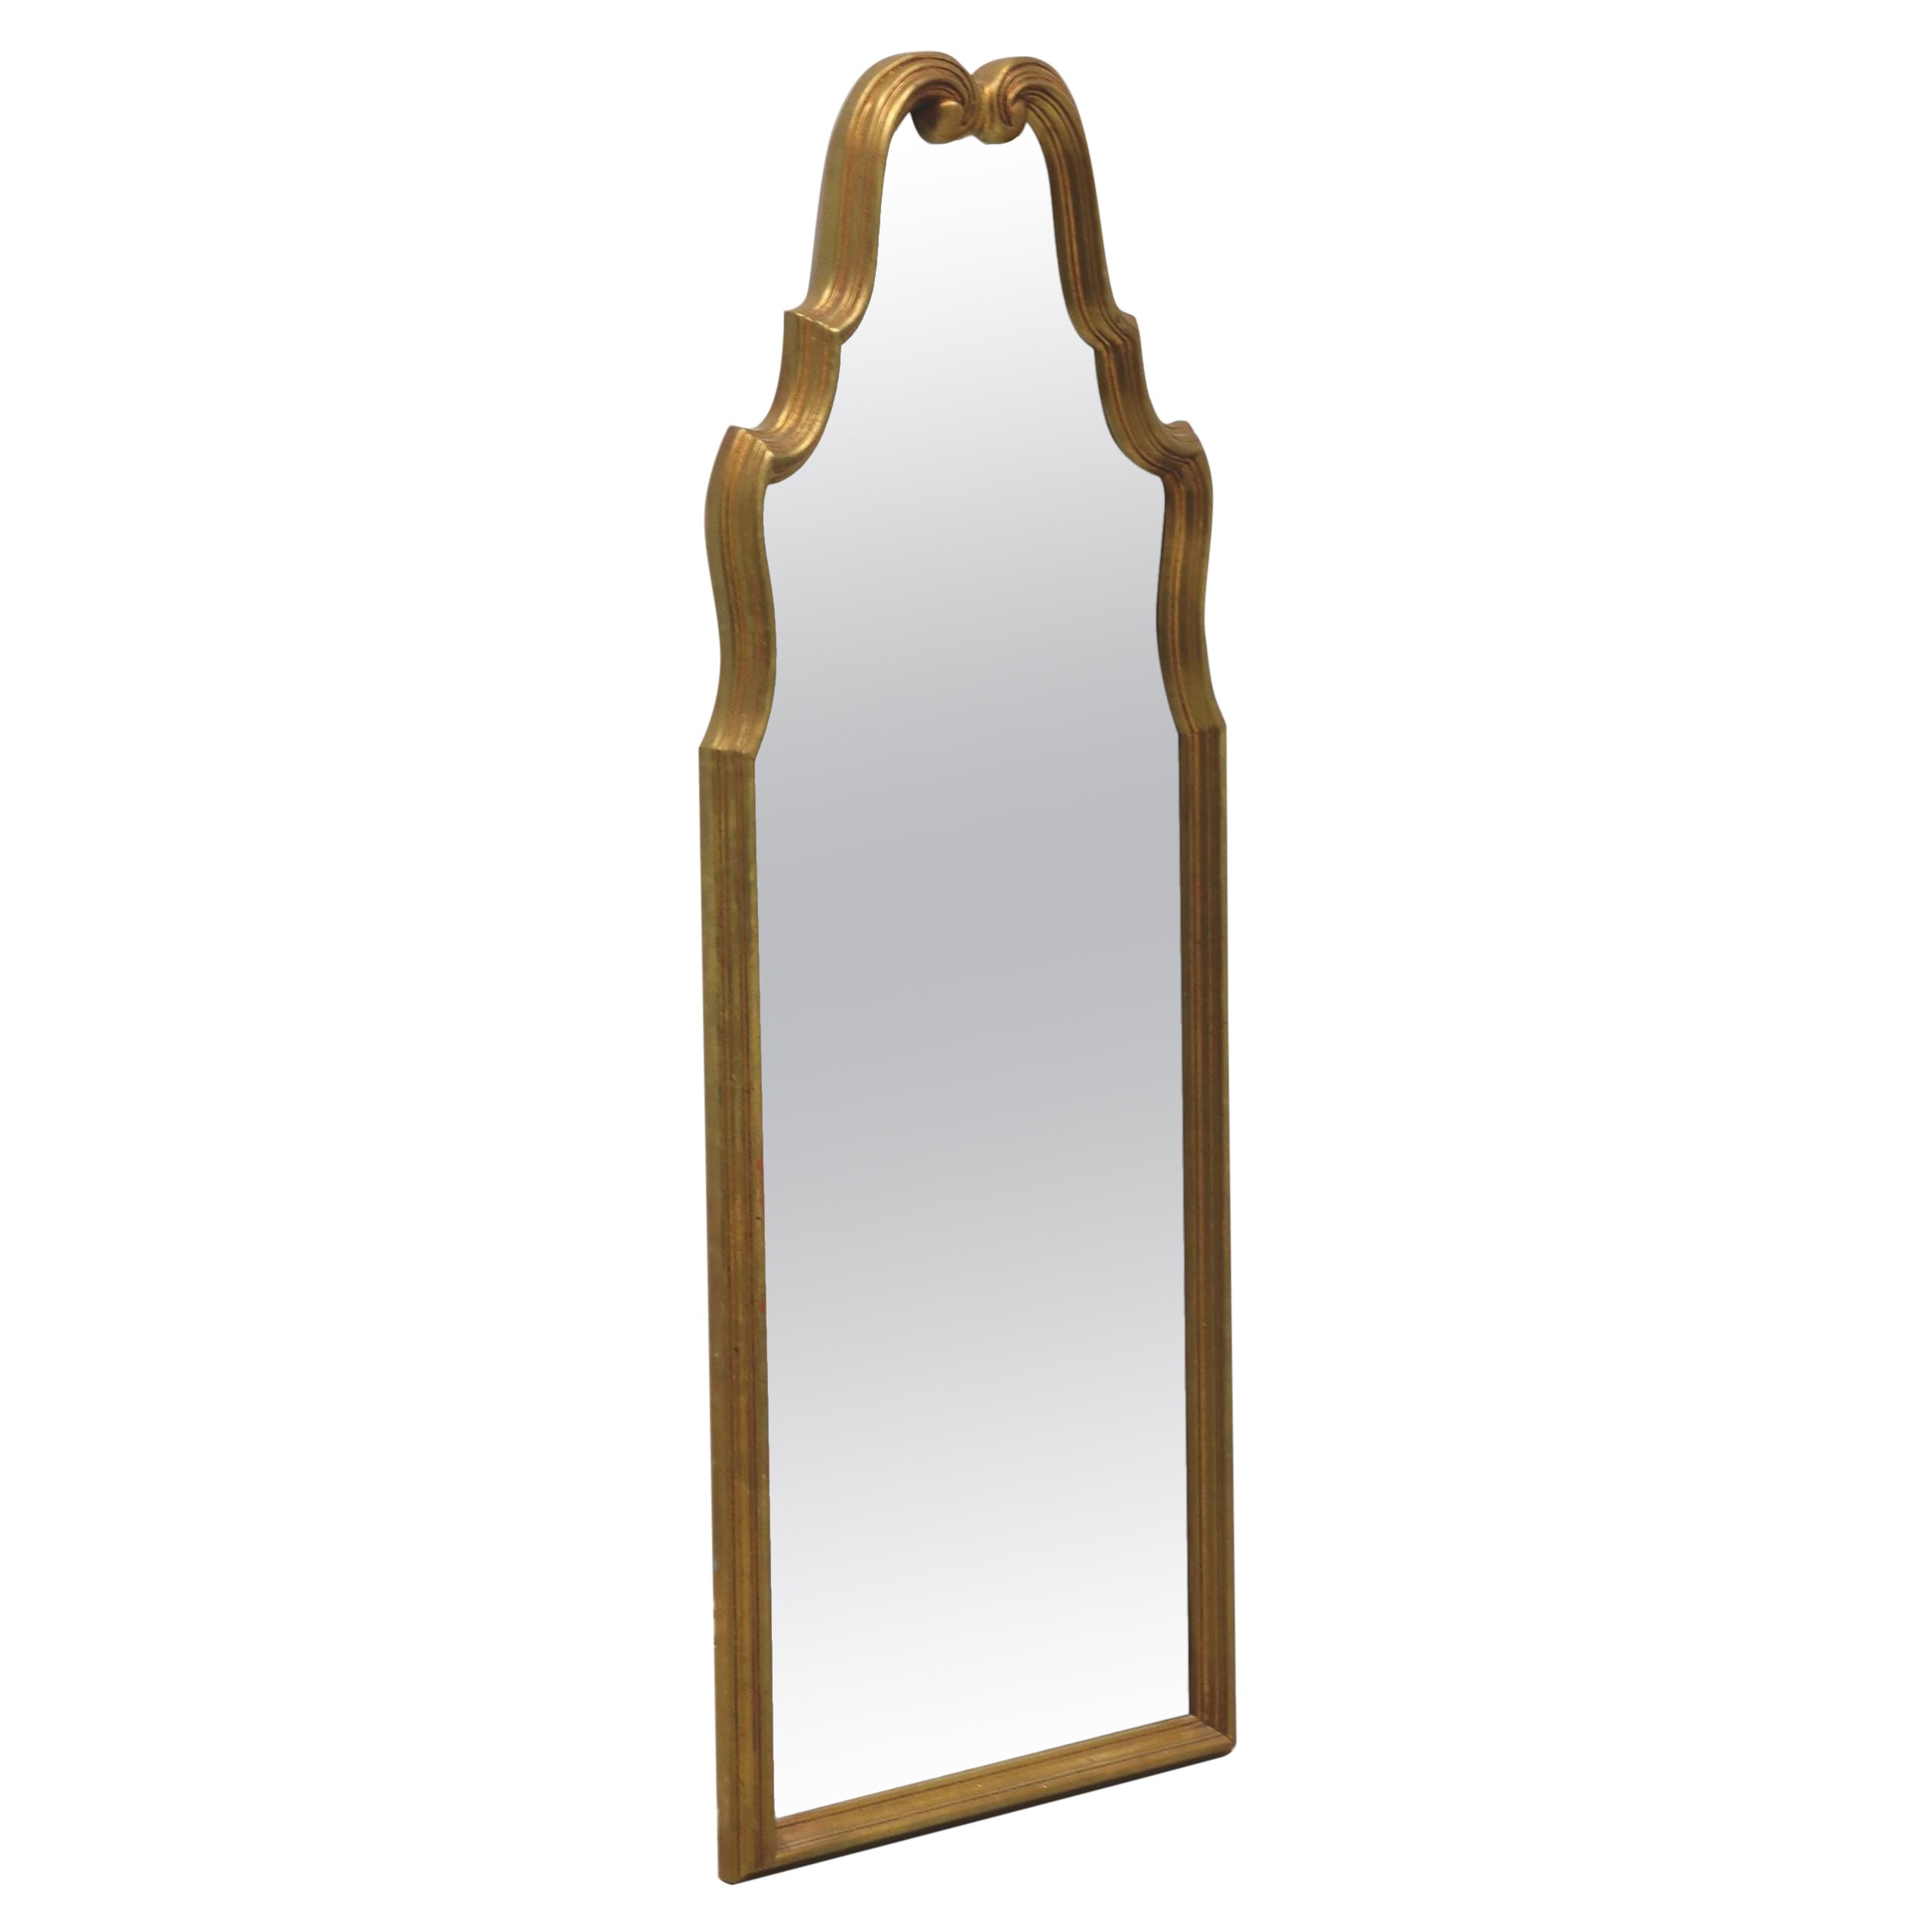 Mid 20th Century Vintage French Rococo Style Gold Wall Mirror